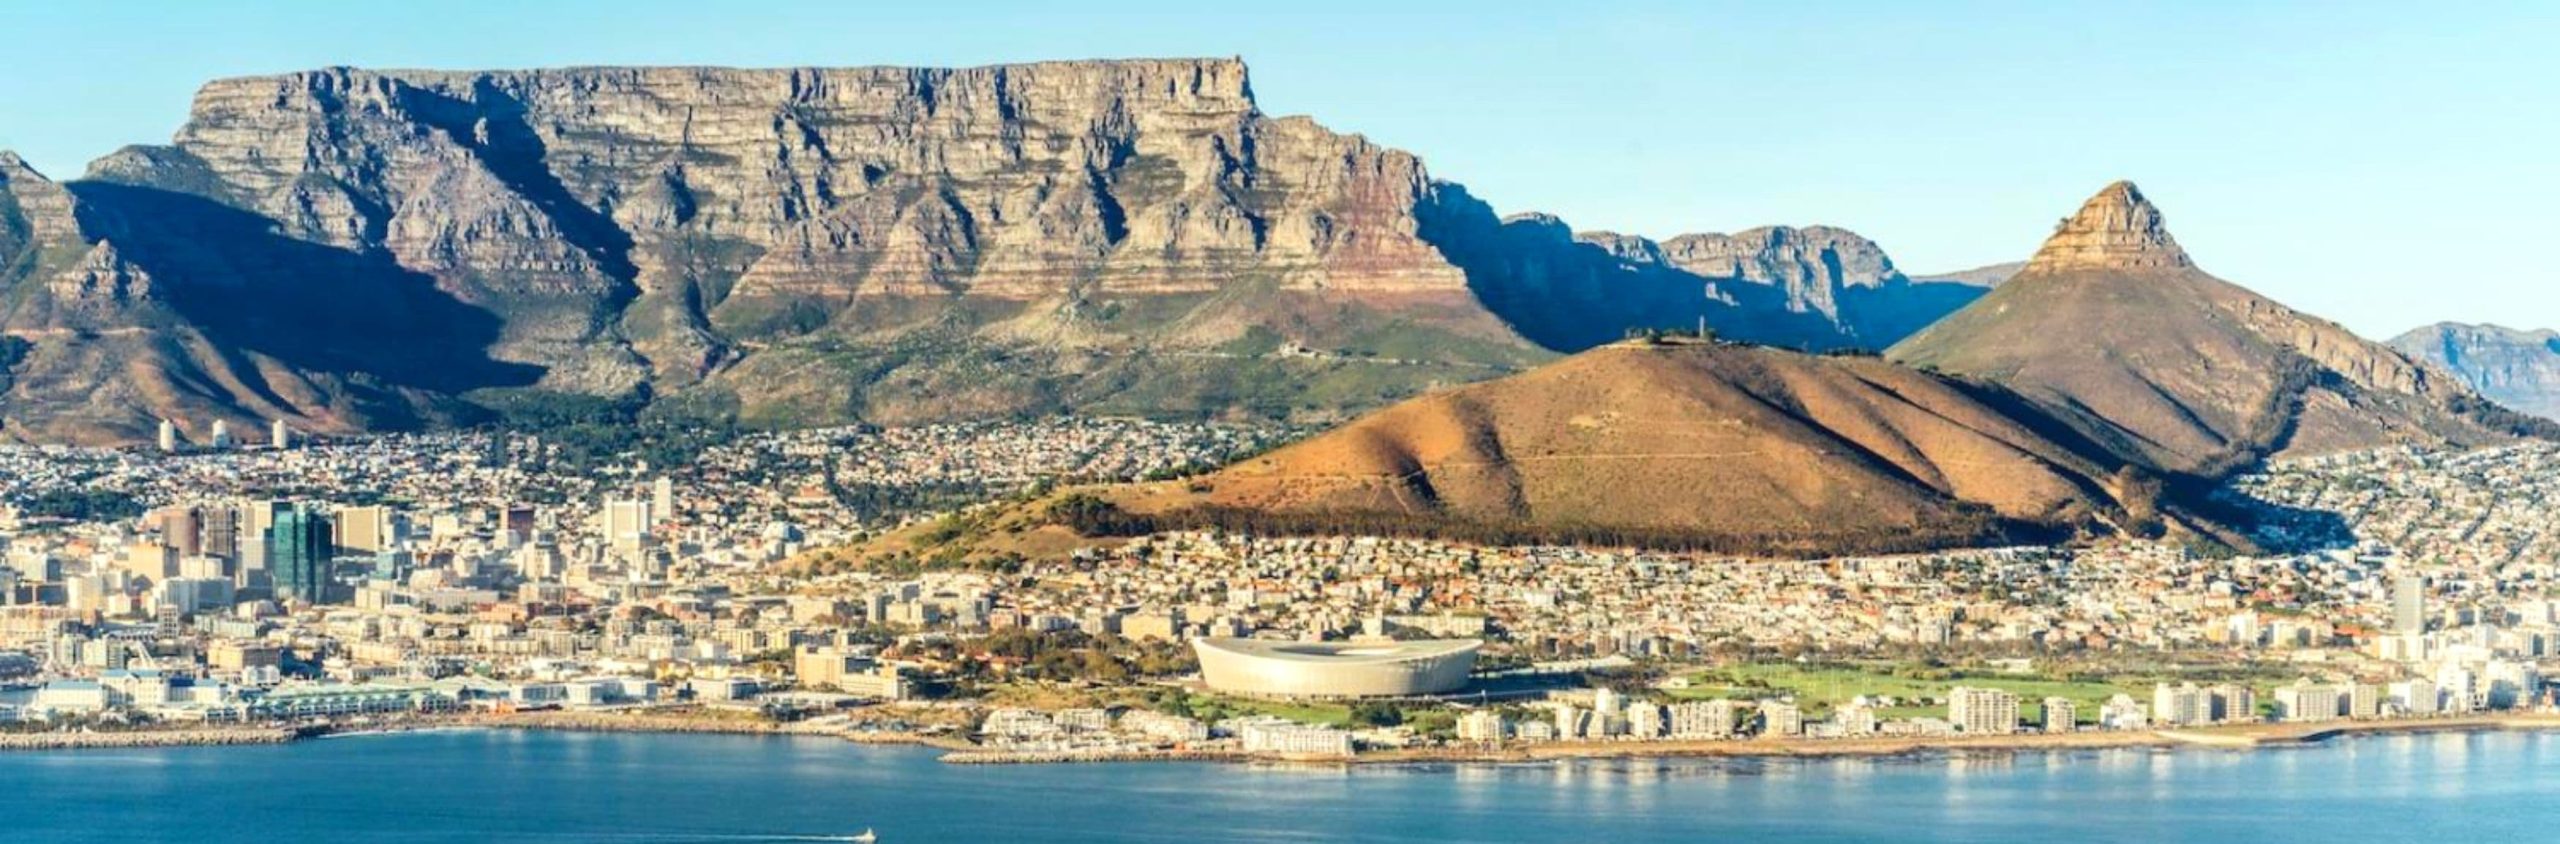 Lions Head and Table Mountain